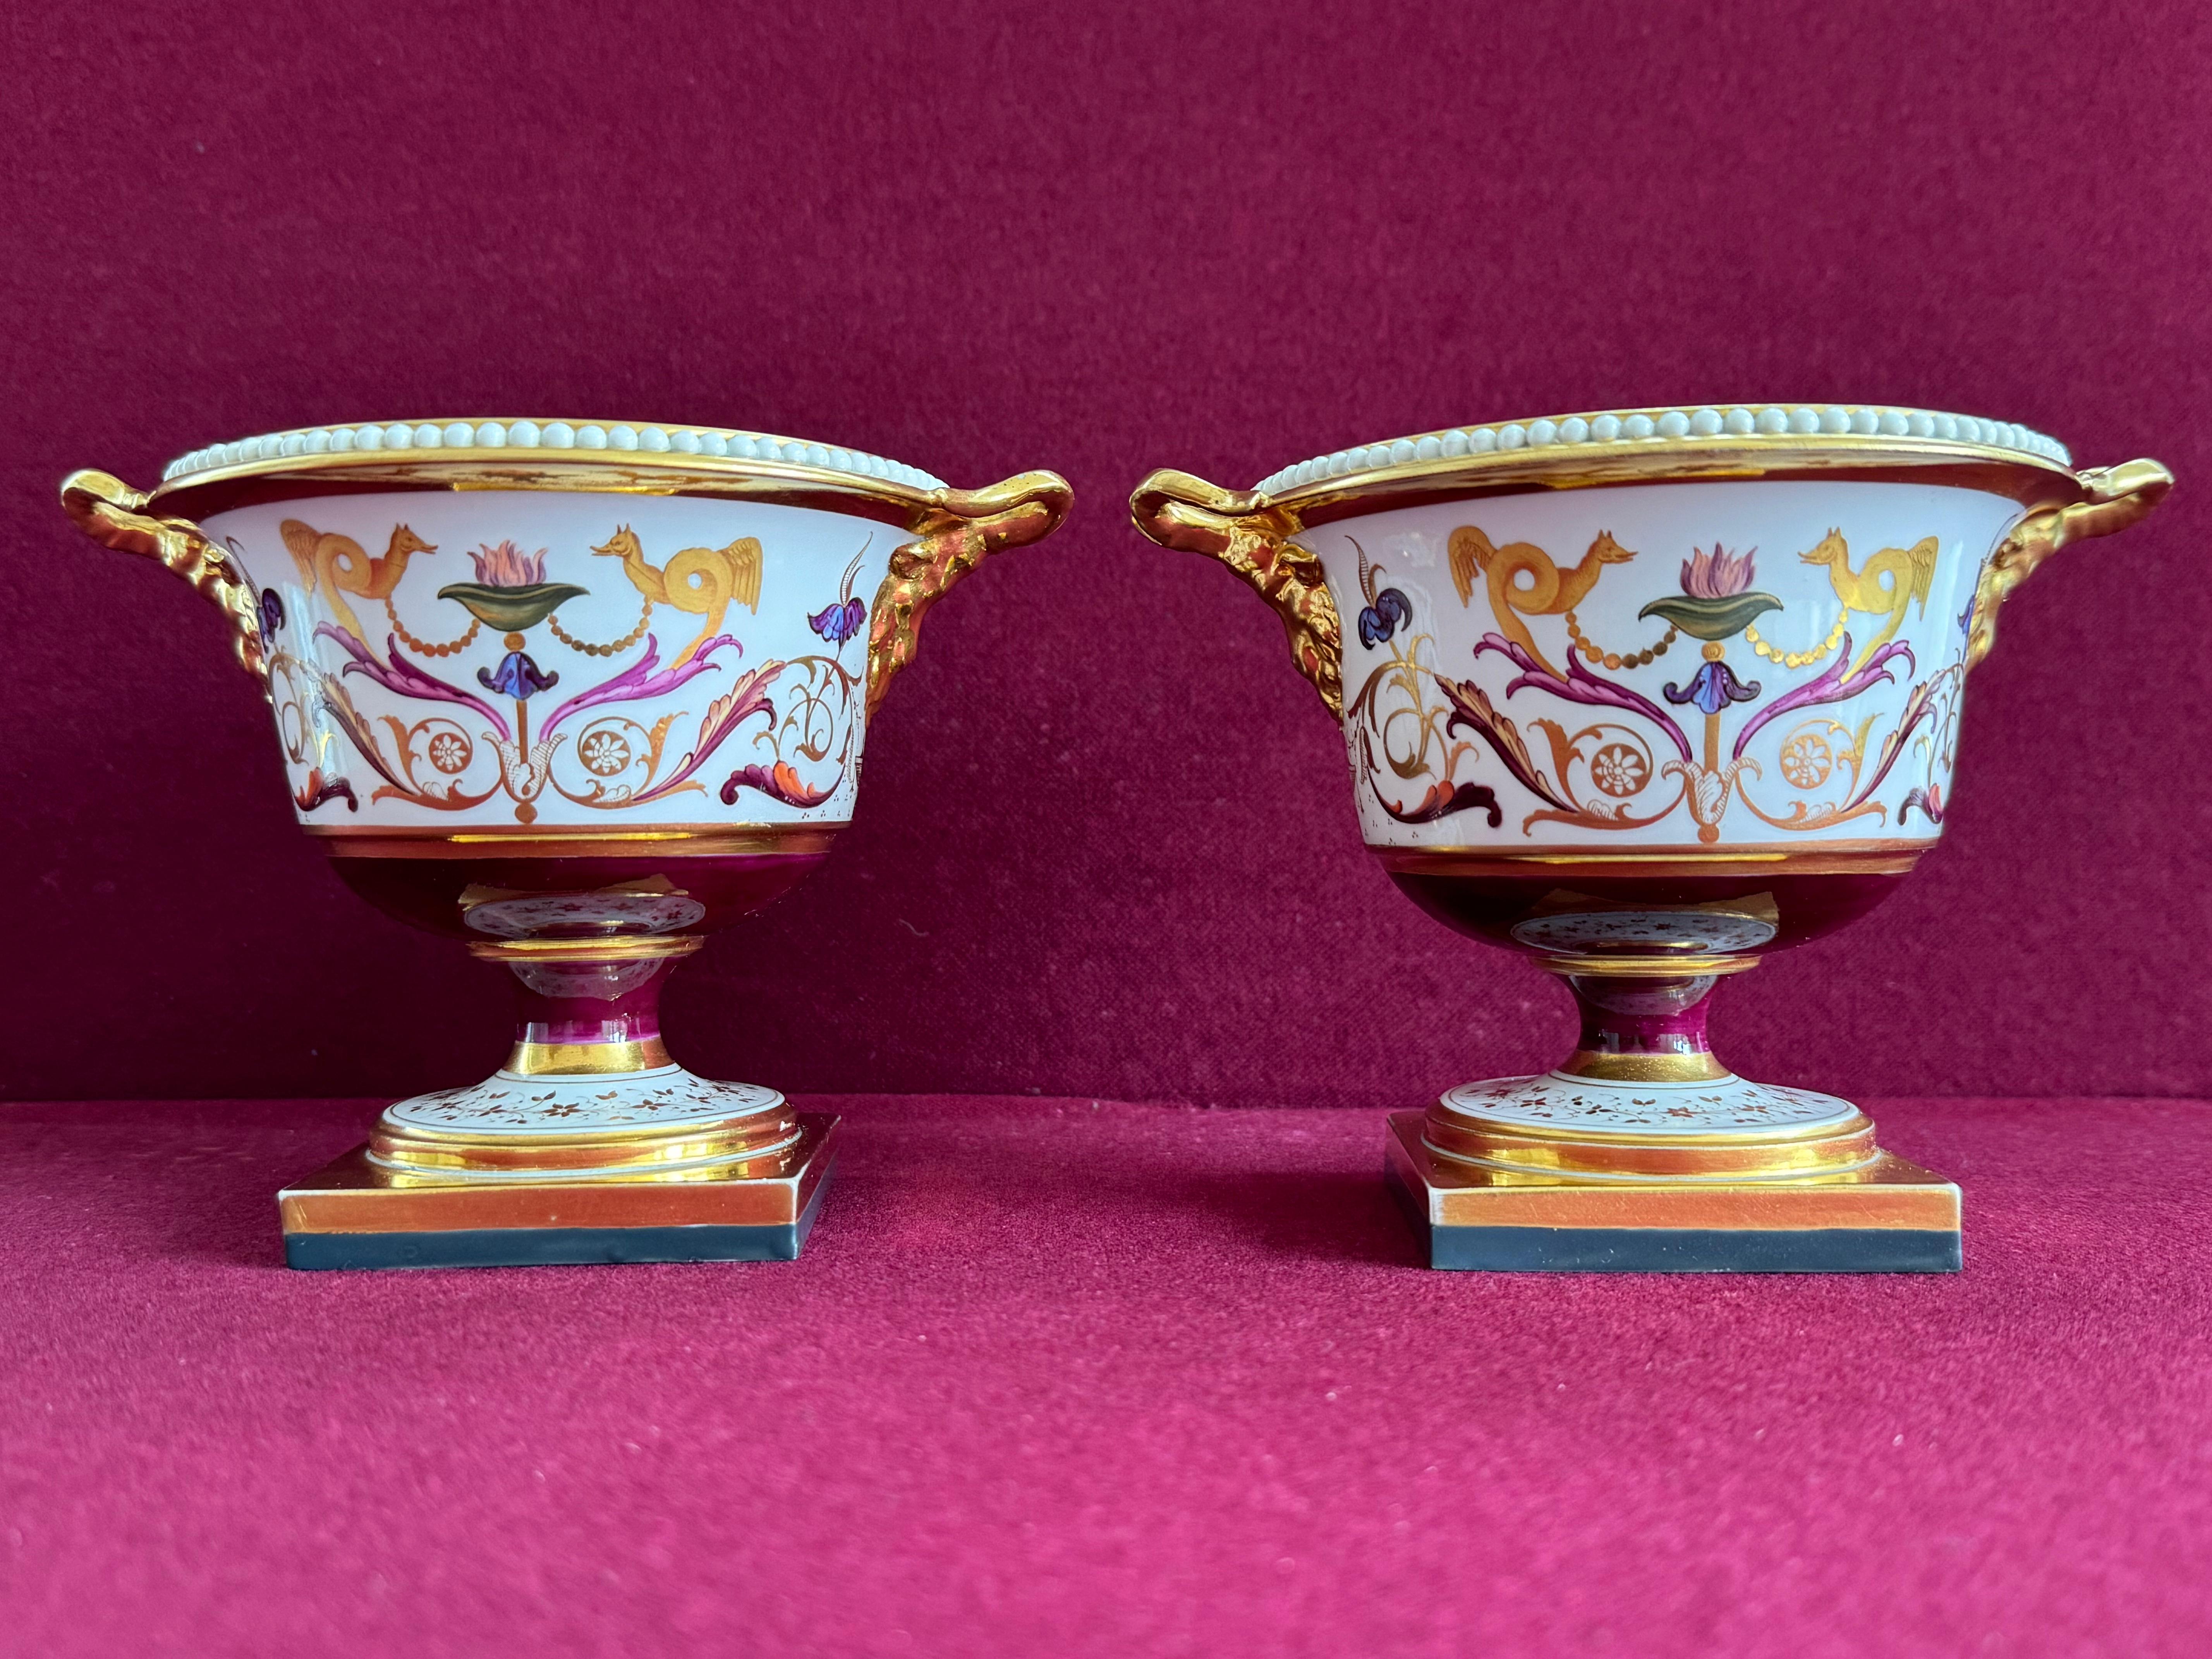 A nice pair of Barr, Flight and Barr Worcester Porcelain Pastille Burners c.1810-1813. Each pastille burner of classical urn shape on square base, with finely modelled 'pearls' to the rim, with two ram's head handles solidly gilded, the main body of